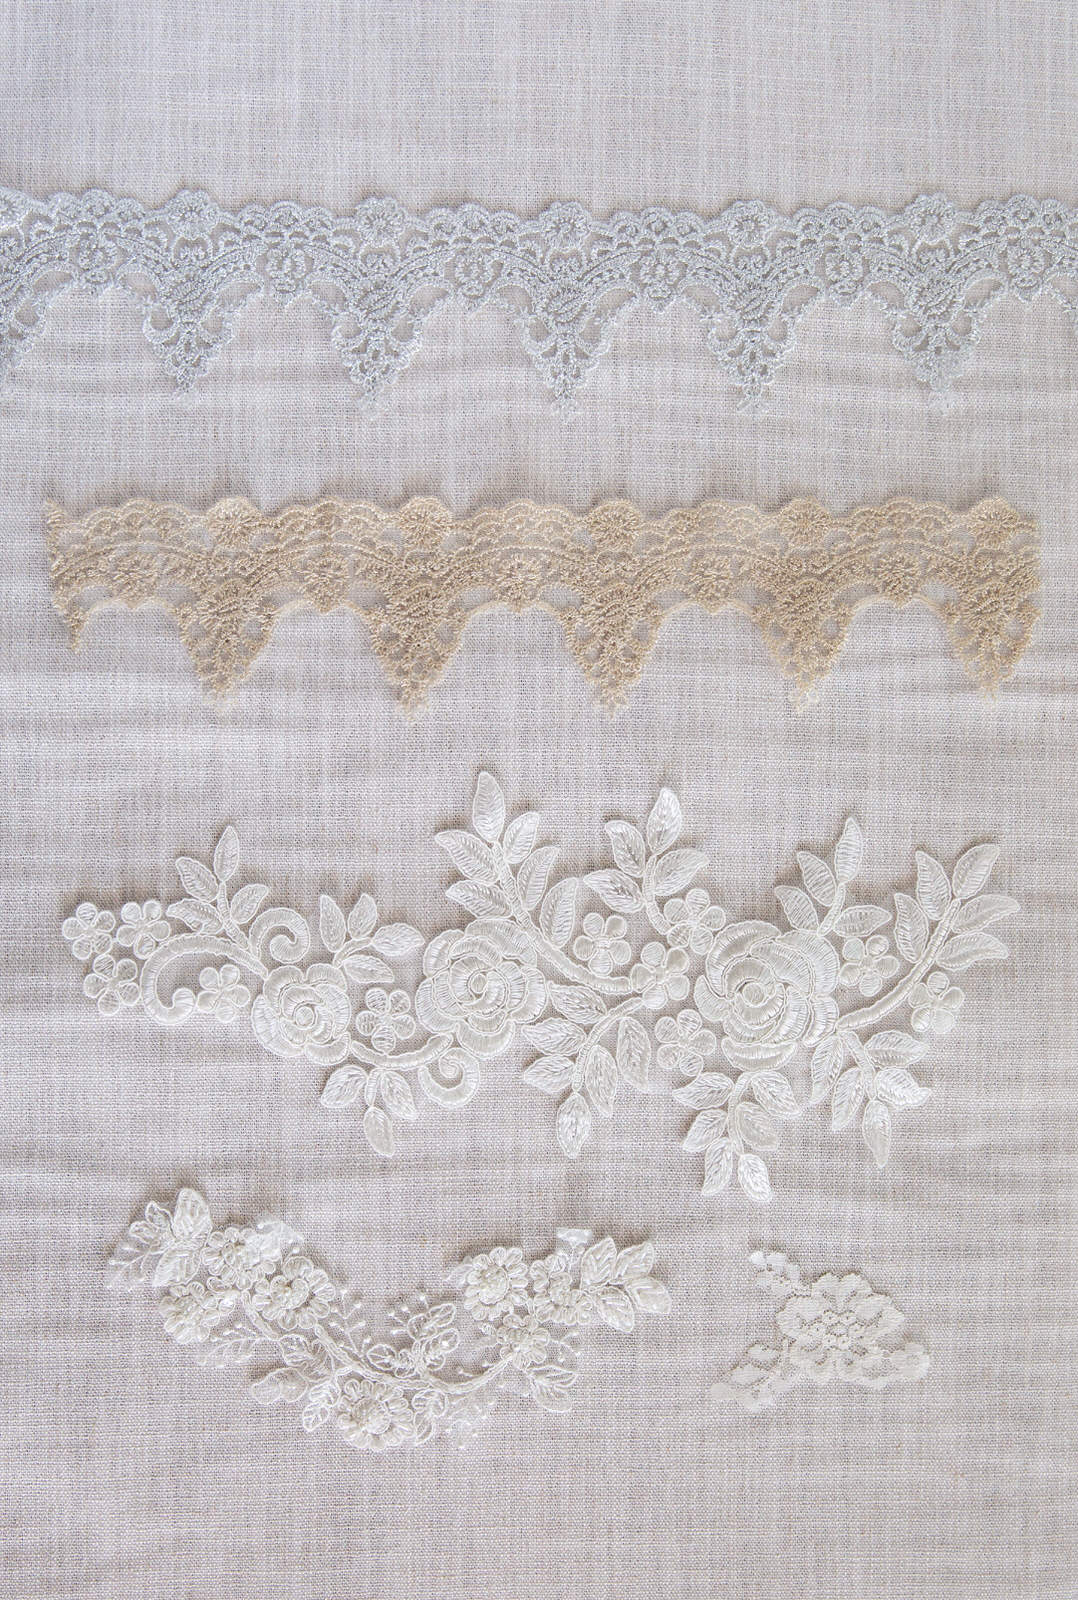 silver and gold metallic embroidered trim and floral appliqué lace designs for wedding